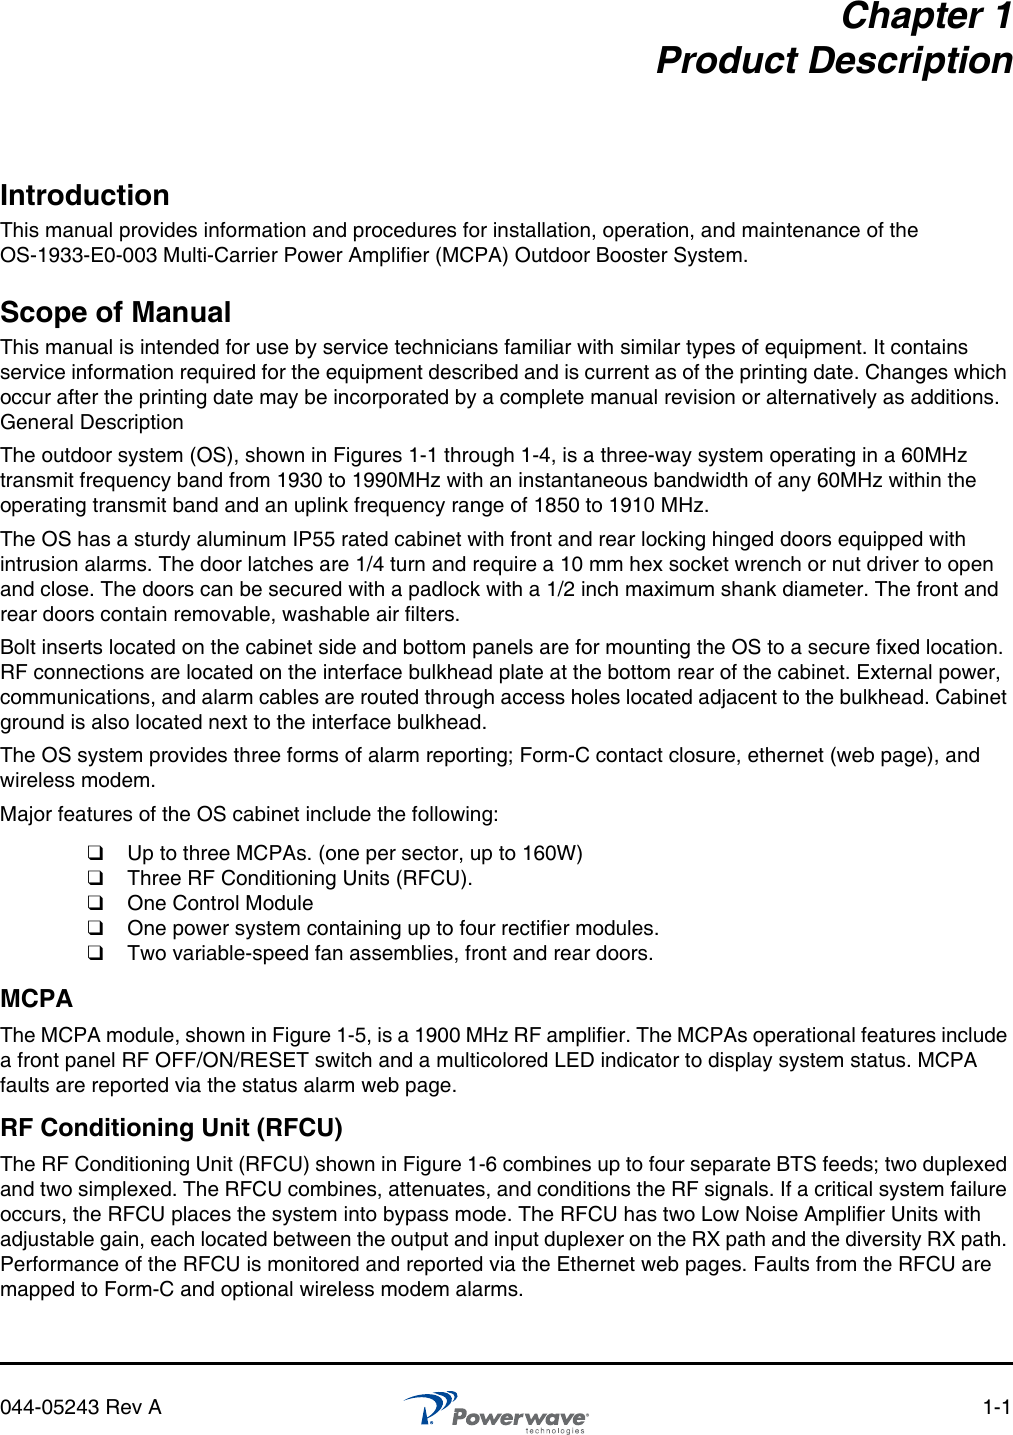 044-05243 Rev A 1-1Chapter 1Product DescriptionIntroductionThis manual provides information and procedures for installation, operation, and maintenance of the OS-1933-E0-003 Multi-Carrier Power Amplifier (MCPA) Outdoor Booster System. Scope of ManualThis manual is intended for use by service technicians familiar with similar types of equipment. It contains service information required for the equipment described and is current as of the printing date. Changes which occur after the printing date may be incorporated by a complete manual revision or alternatively as additions. General DescriptionThe outdoor system (OS), shown in Figures 1-1 through 1-4, is a three-way system operating in a 60MHz transmit frequency band from 1930 to 1990MHz with an instantaneous bandwidth of any 60MHz within the operating transmit band and an uplink frequency range of 1850 to 1910 MHz. The OS has a sturdy aluminum IP55 rated cabinet with front and rear locking hinged doors equipped with intrusion alarms. The door latches are 1/4 turn and require a 10 mm hex socket wrench or nut driver to open and close. The doors can be secured with a padlock with a 1/2 inch maximum shank diameter. The front and rear doors contain removable, washable air filters.Bolt inserts located on the cabinet side and bottom panels are for mounting the OS to a secure fixed location. RF connections are located on the interface bulkhead plate at the bottom rear of the cabinet. External power, communications, and alarm cables are routed through access holes located adjacent to the bulkhead. Cabinet ground is also located next to the interface bulkhead.The OS system provides three forms of alarm reporting; Form-C contact closure, ethernet (web page), and wireless modem.Major features of the OS cabinet include the following:MCPAThe MCPA module, shown in Figure 1-5, is a 1900 MHz RF amplifier. The MCPAs operational features include a front panel RF OFF/ON/RESET switch and a multicolored LED indicator to display system status. MCPA faults are reported via the status alarm web page.RF Conditioning Unit (RFCU)The RF Conditioning Unit (RFCU) shown in Figure 1-6 combines up to four separate BTS feeds; two duplexed and two simplexed. The RFCU combines, attenuates, and conditions the RF signals. If a critical system failure occurs, the RFCU places the system into bypass mode. The RFCU has two Low Noise Amplifier Units with adjustable gain, each located between the output and input duplexer on the RX path and the diversity RX path. Performance of the RFCU is monitored and reported via the Ethernet web pages. Faults from the RFCU are mapped to Form-C and optional wireless modem alarms.❑Up to three MCPAs. (one per sector, up to 160W)❑Three RF Conditioning Units (RFCU). ❑One Control Module❑One power system containing up to four rectifier modules.❑Two variable-speed fan assemblies, front and rear doors.